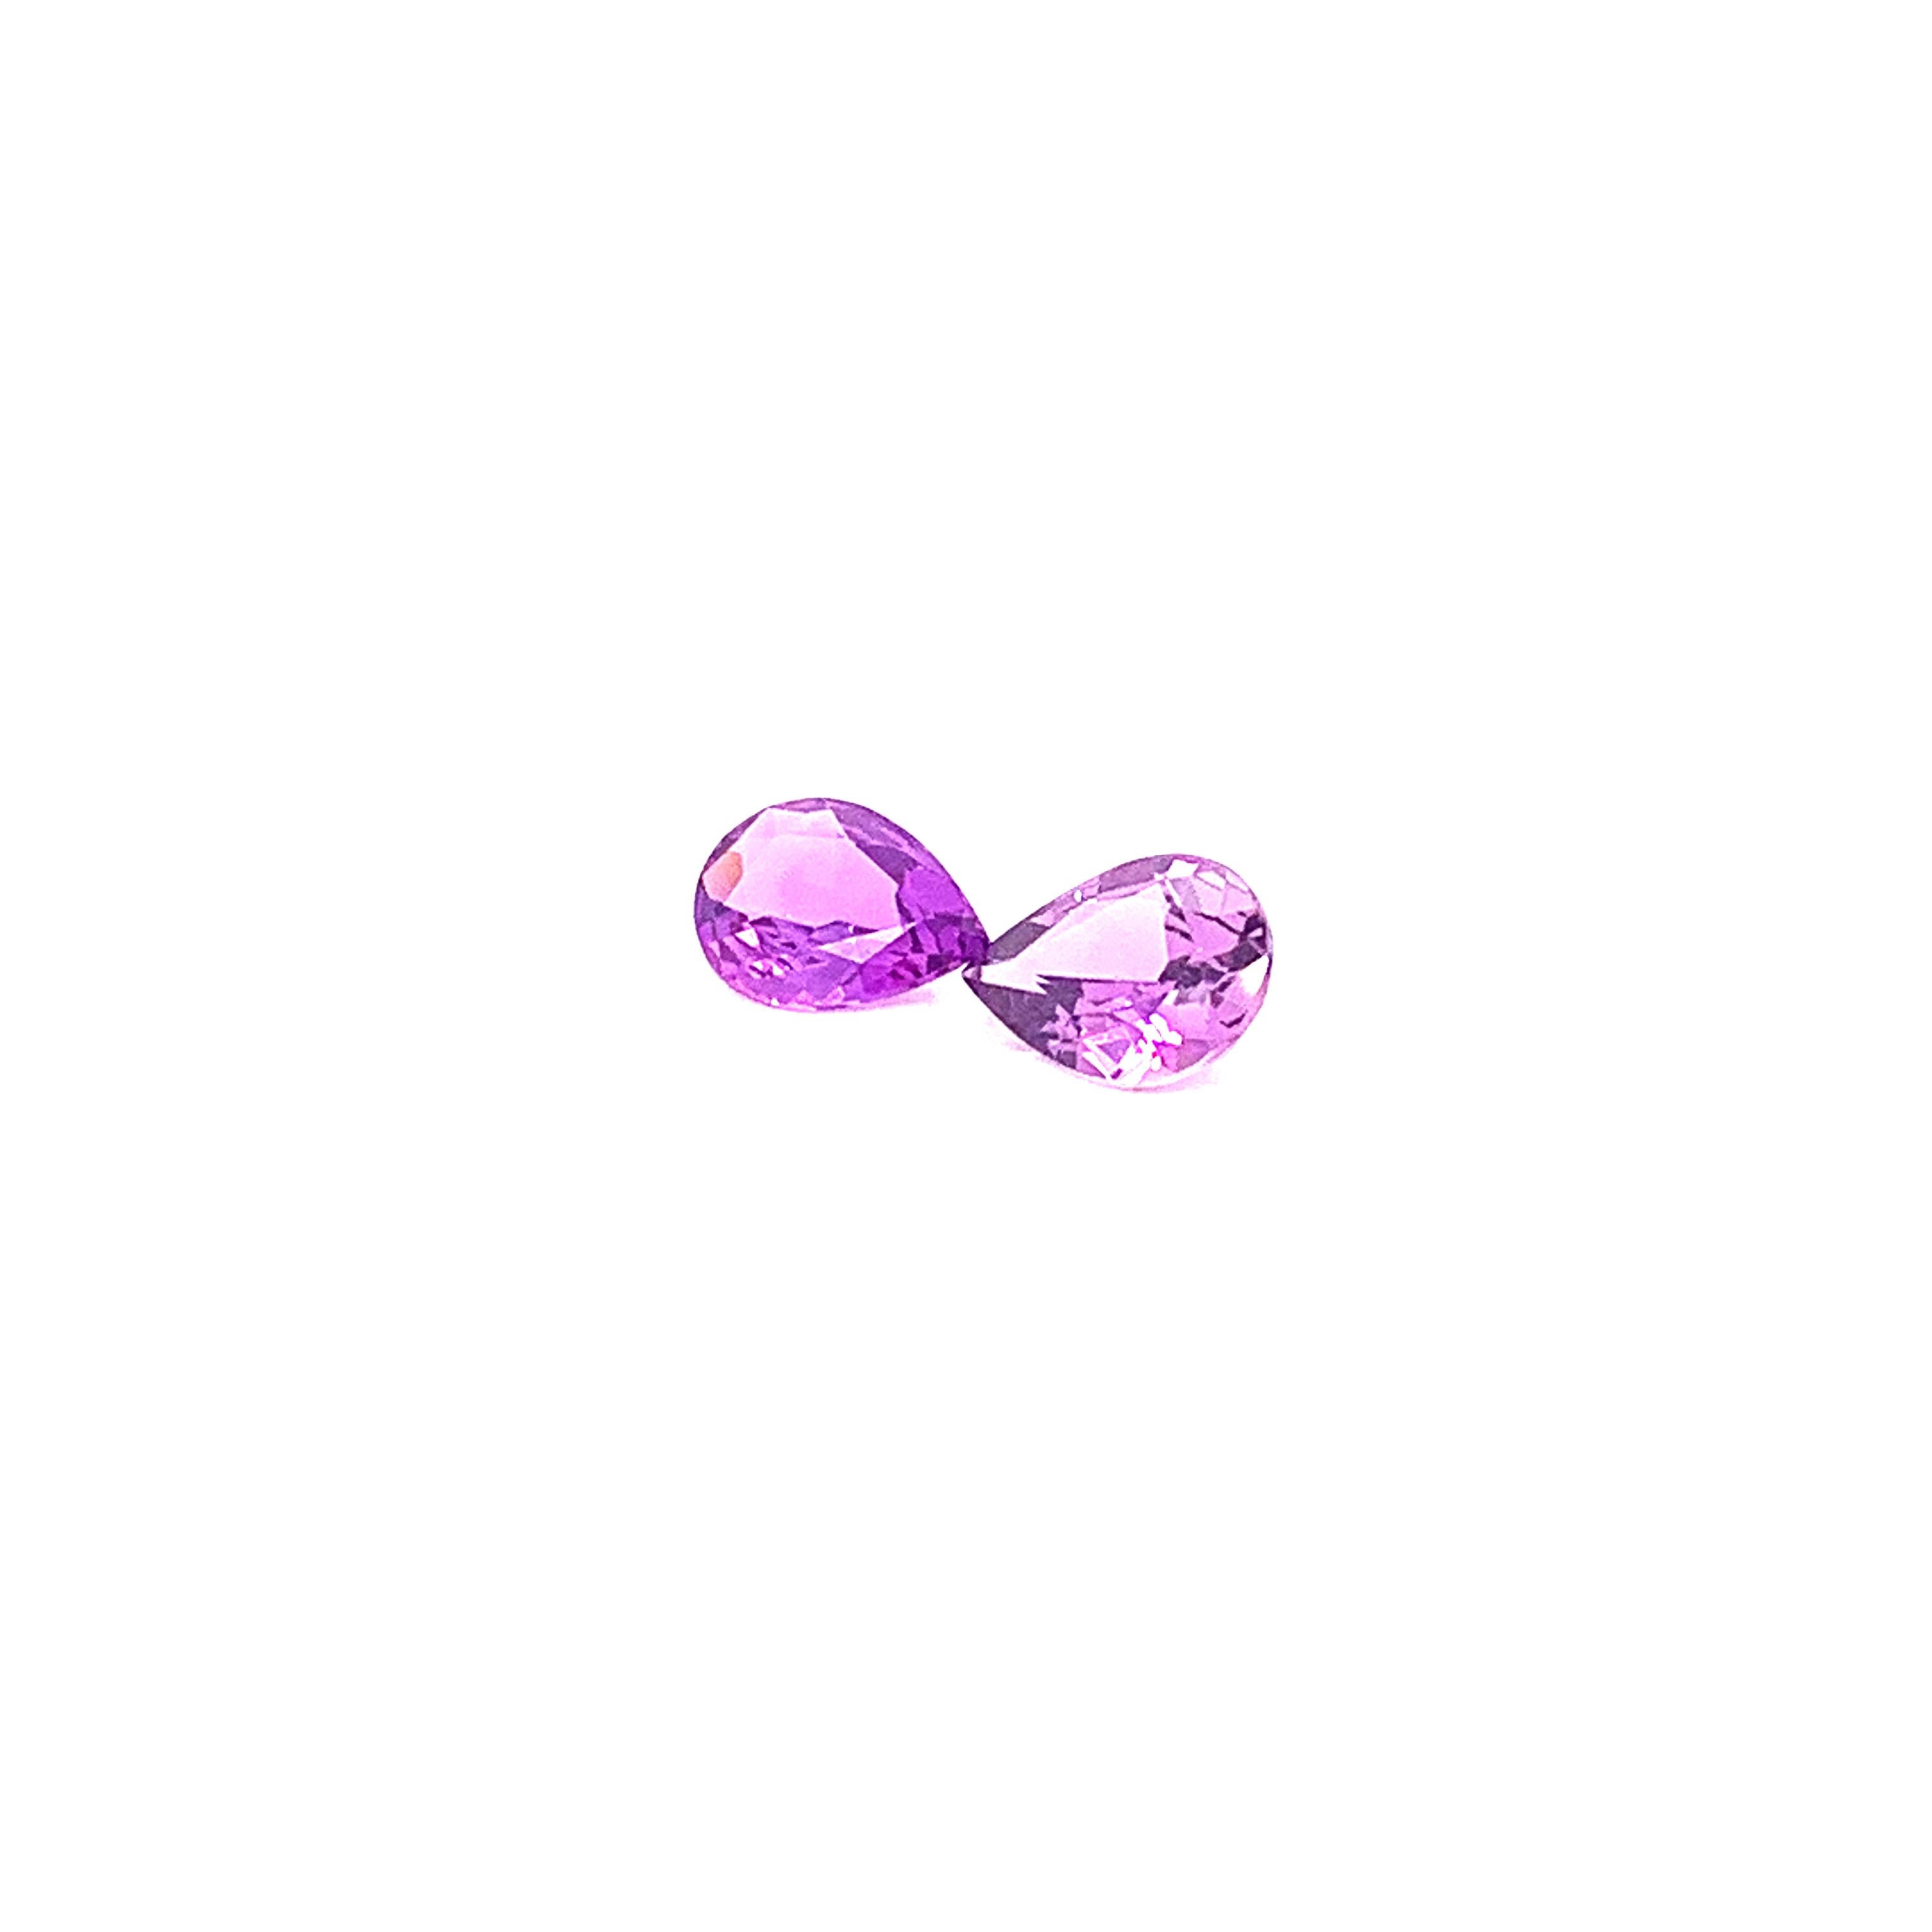 Contemporary 1.45 Carat Pear Shaped Purple Sapphire, Pair For Sale